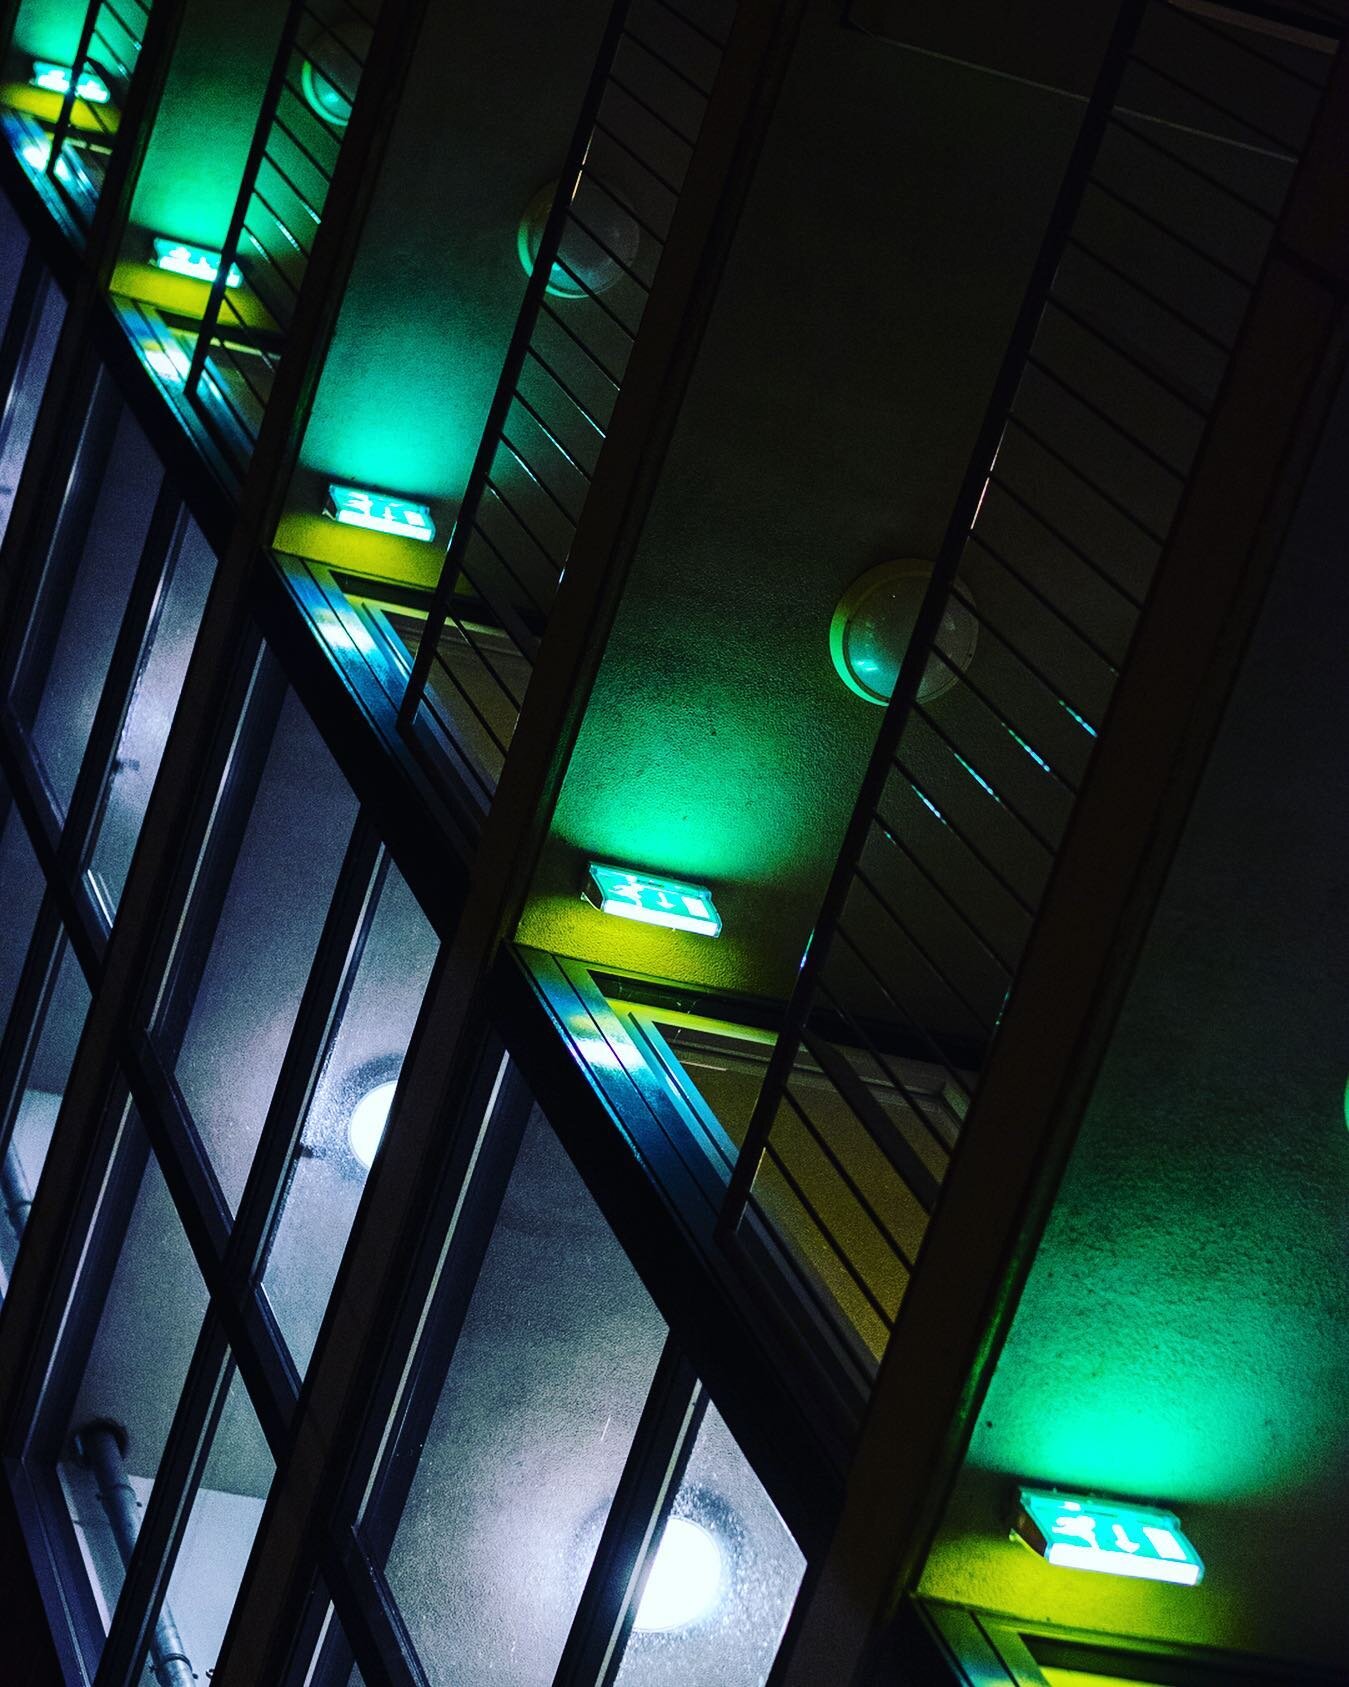 Exit.

#exit #light #repetition #sign #green #diagonal #fiji #fujifilm #xt1 #xf56 #color #architecture #nightphotography